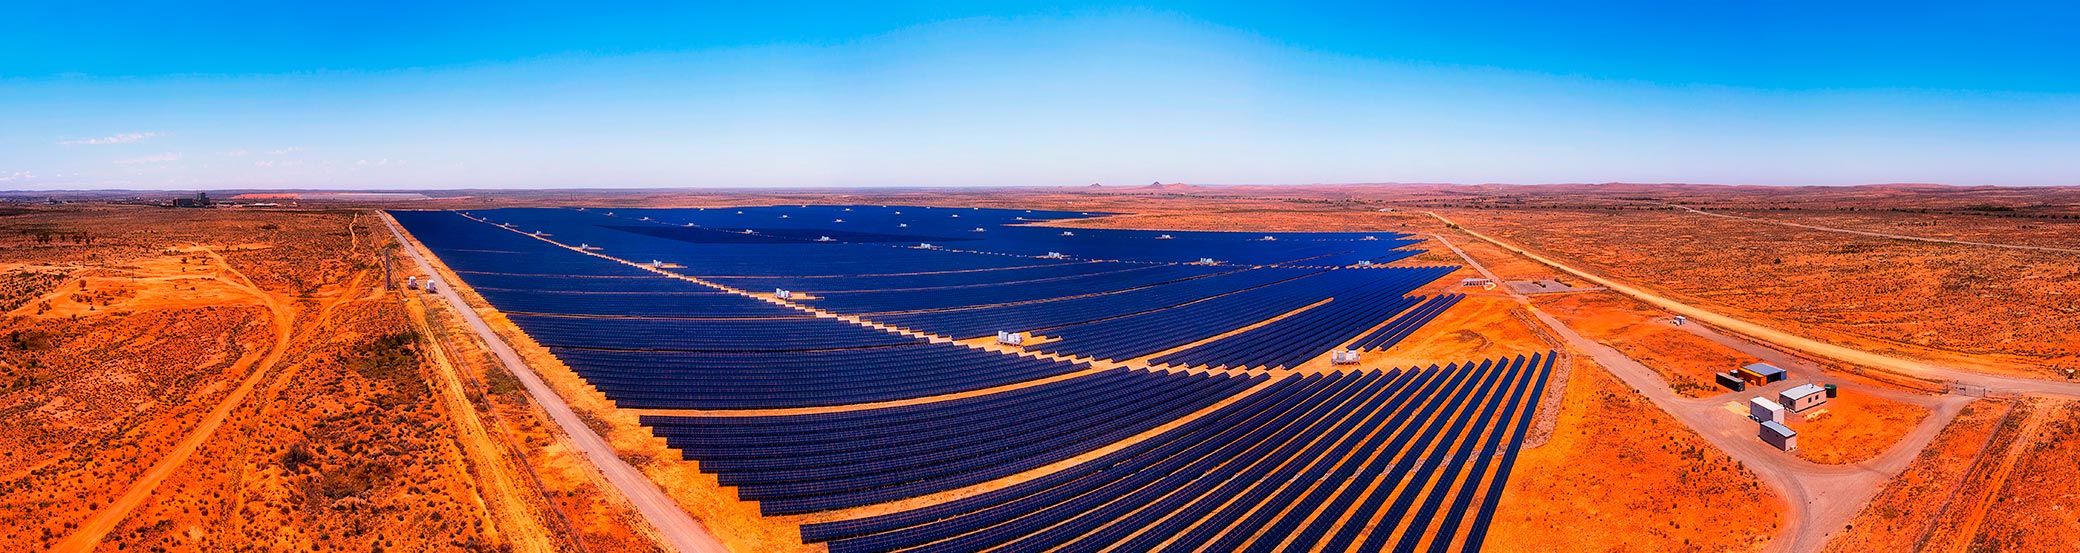 Huge solar installation in the outback as far as the eye can see